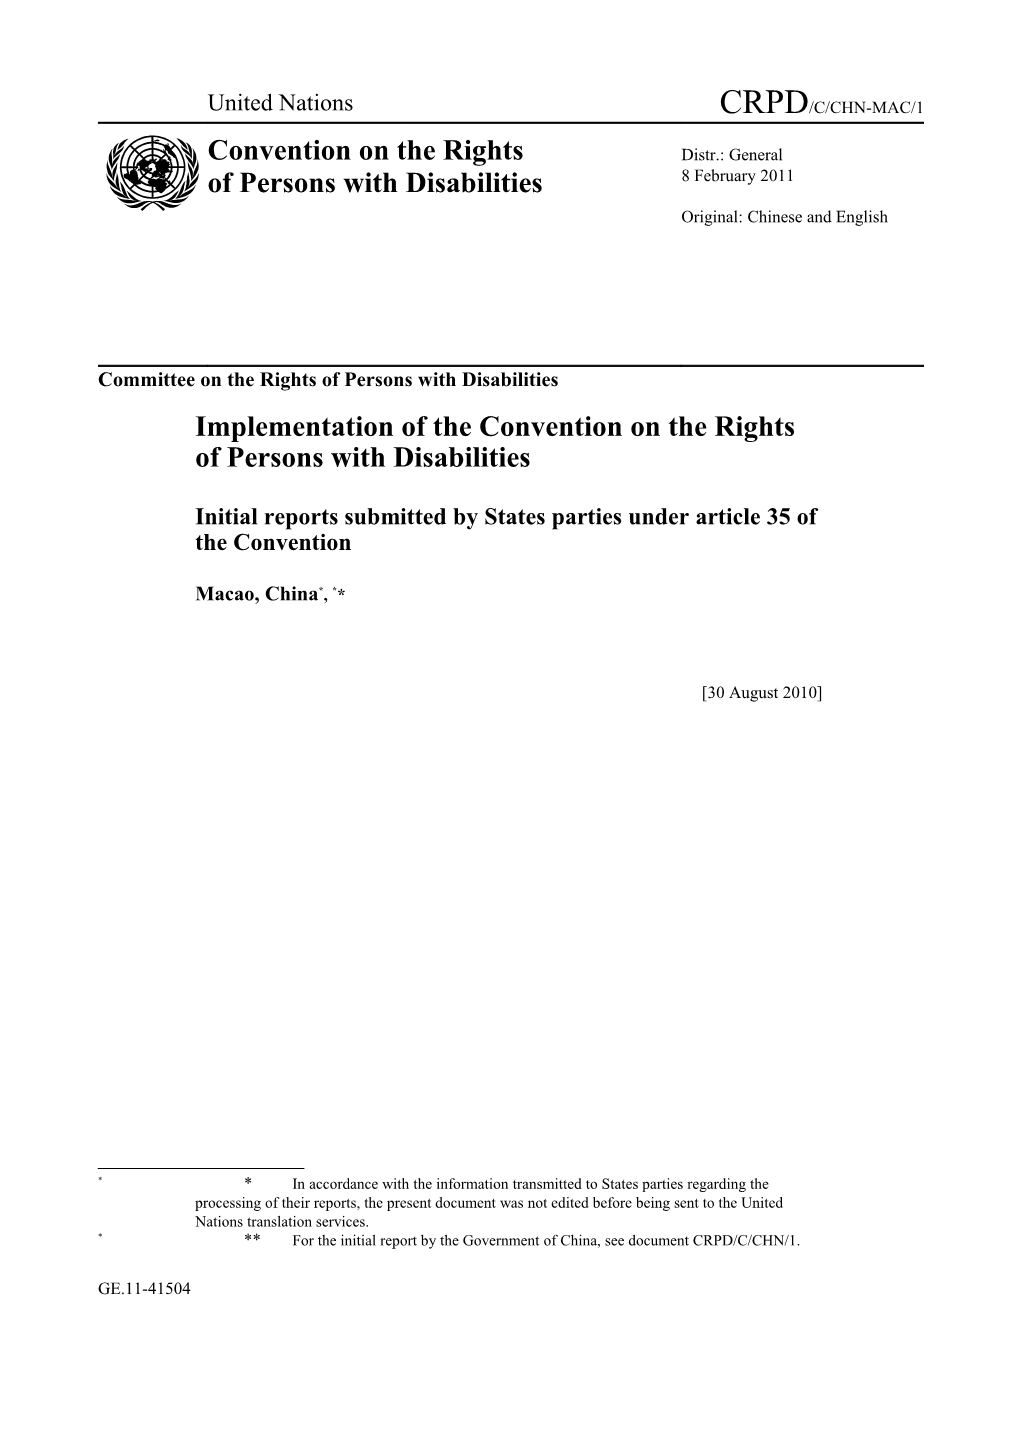 Committee on the Rights of Persons with Disabilities s5